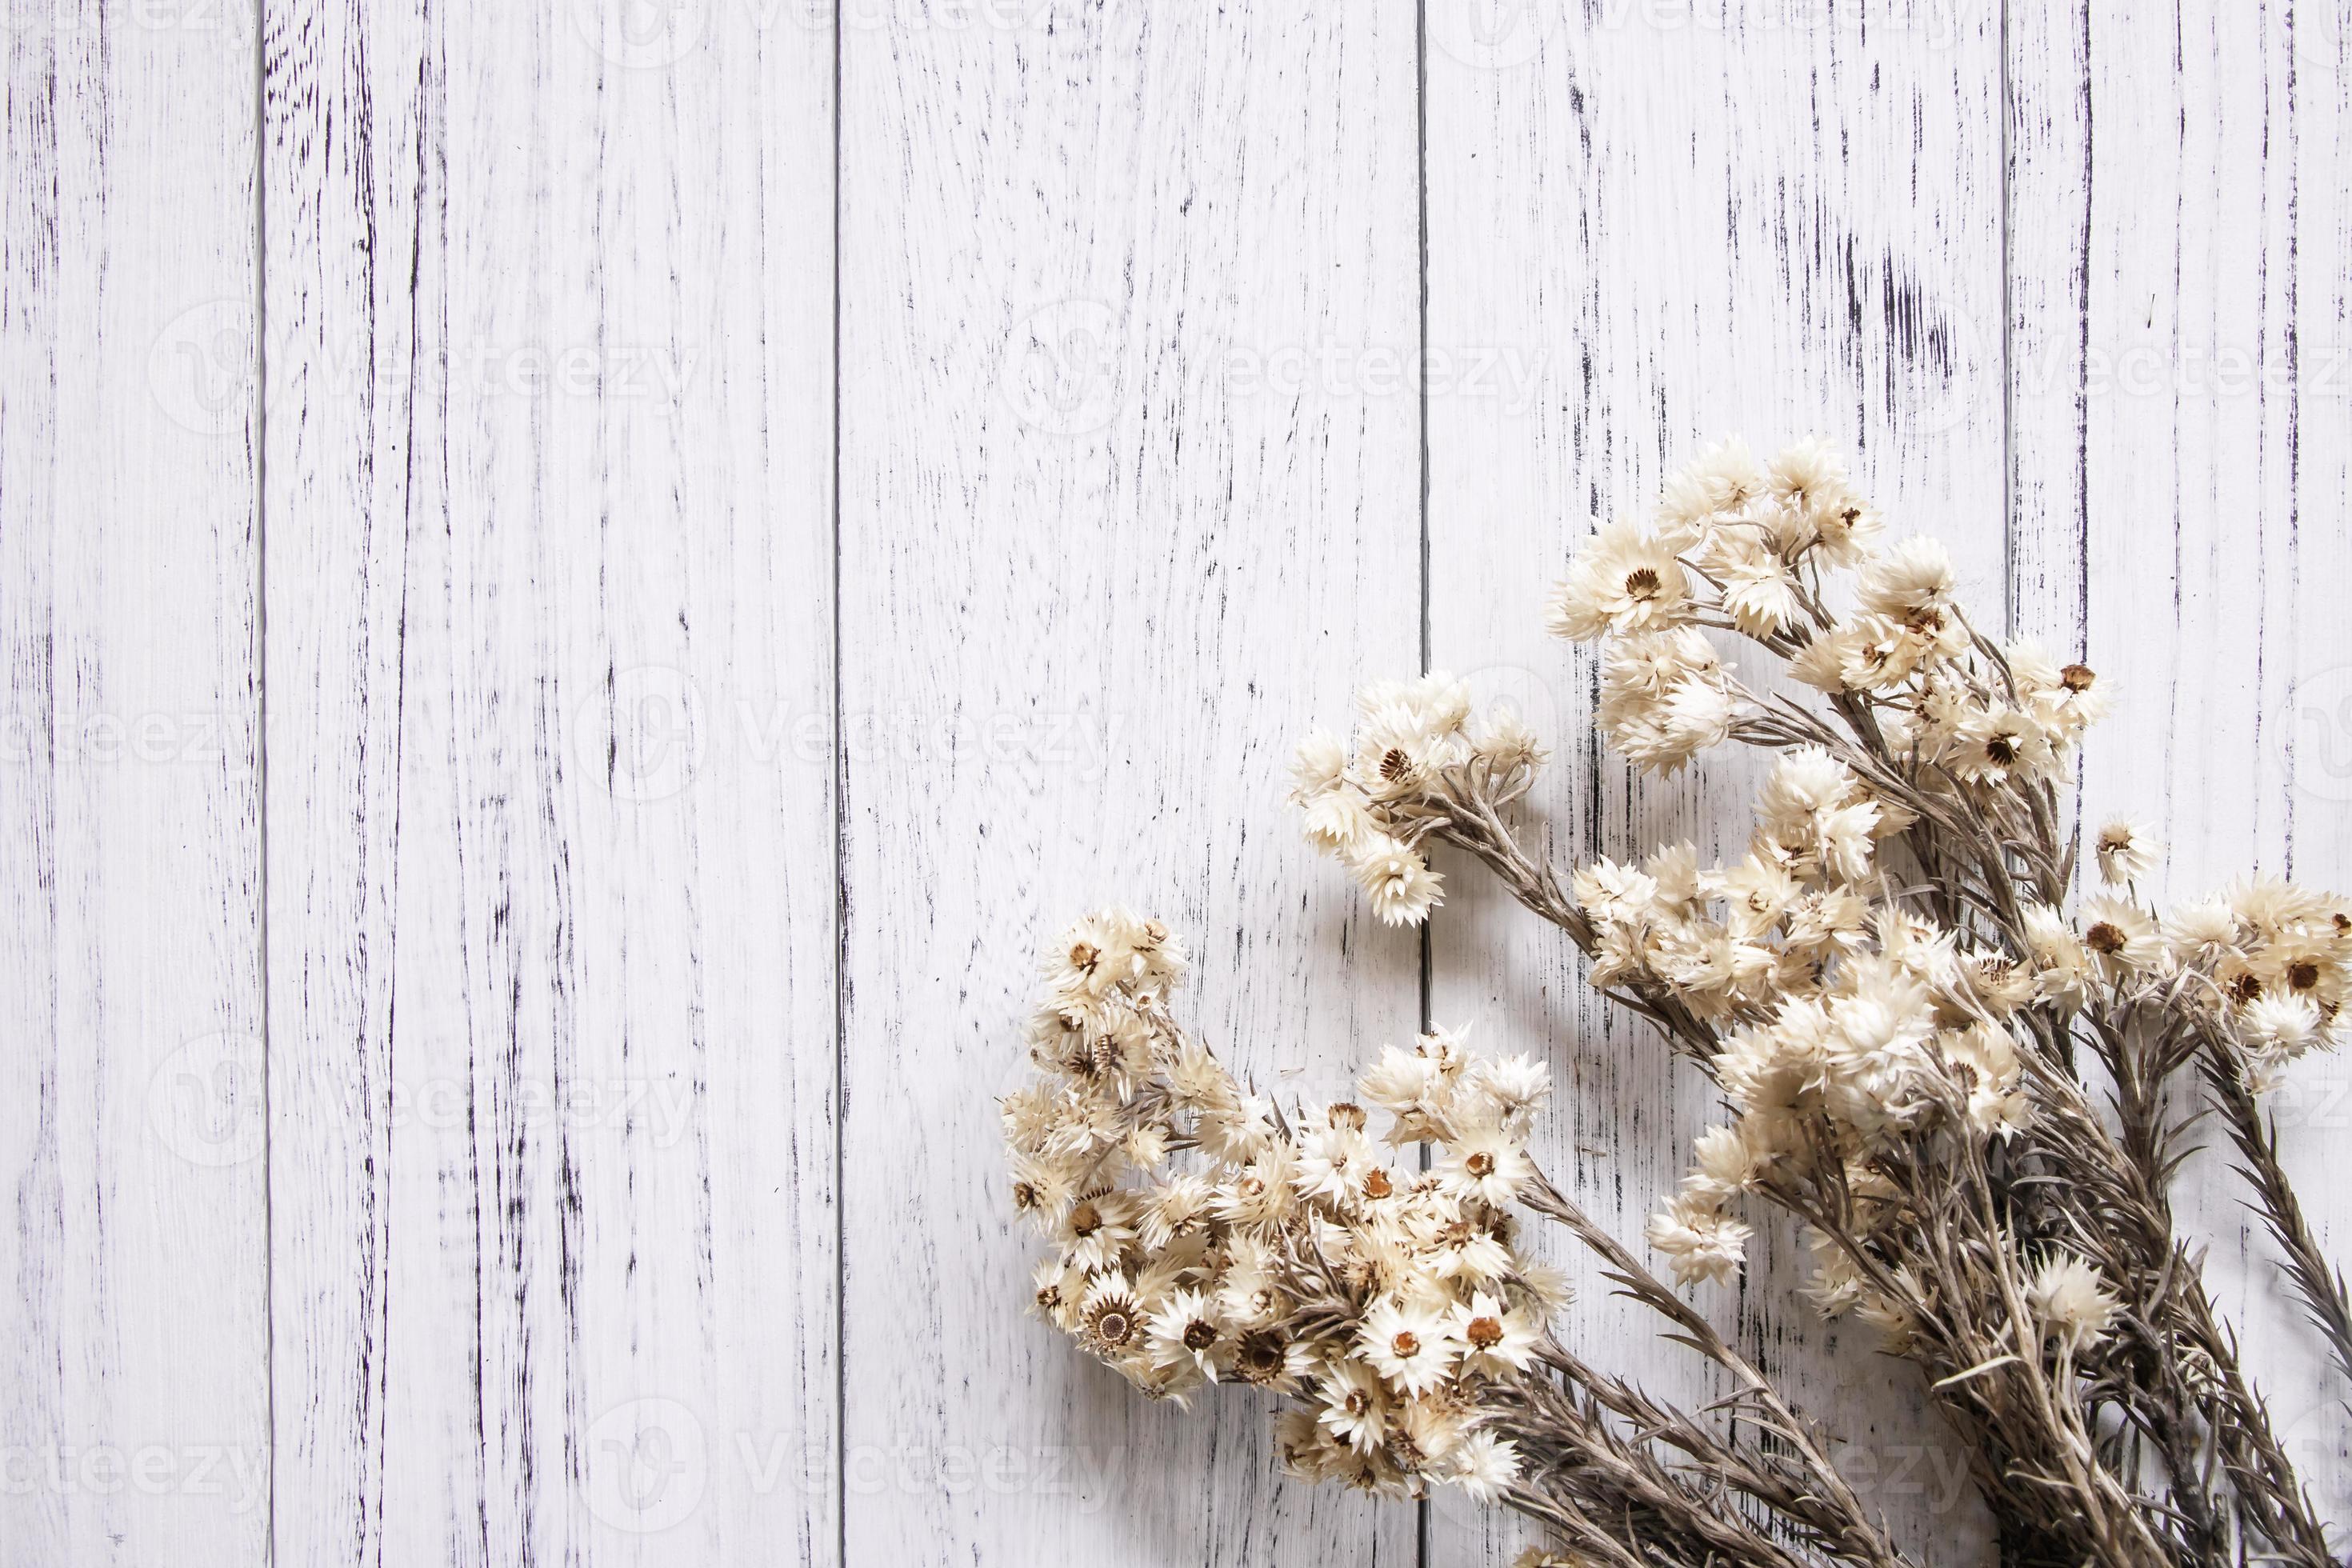 Dried white flowers on white wood 3379896 Stock Photo at Vecteezy